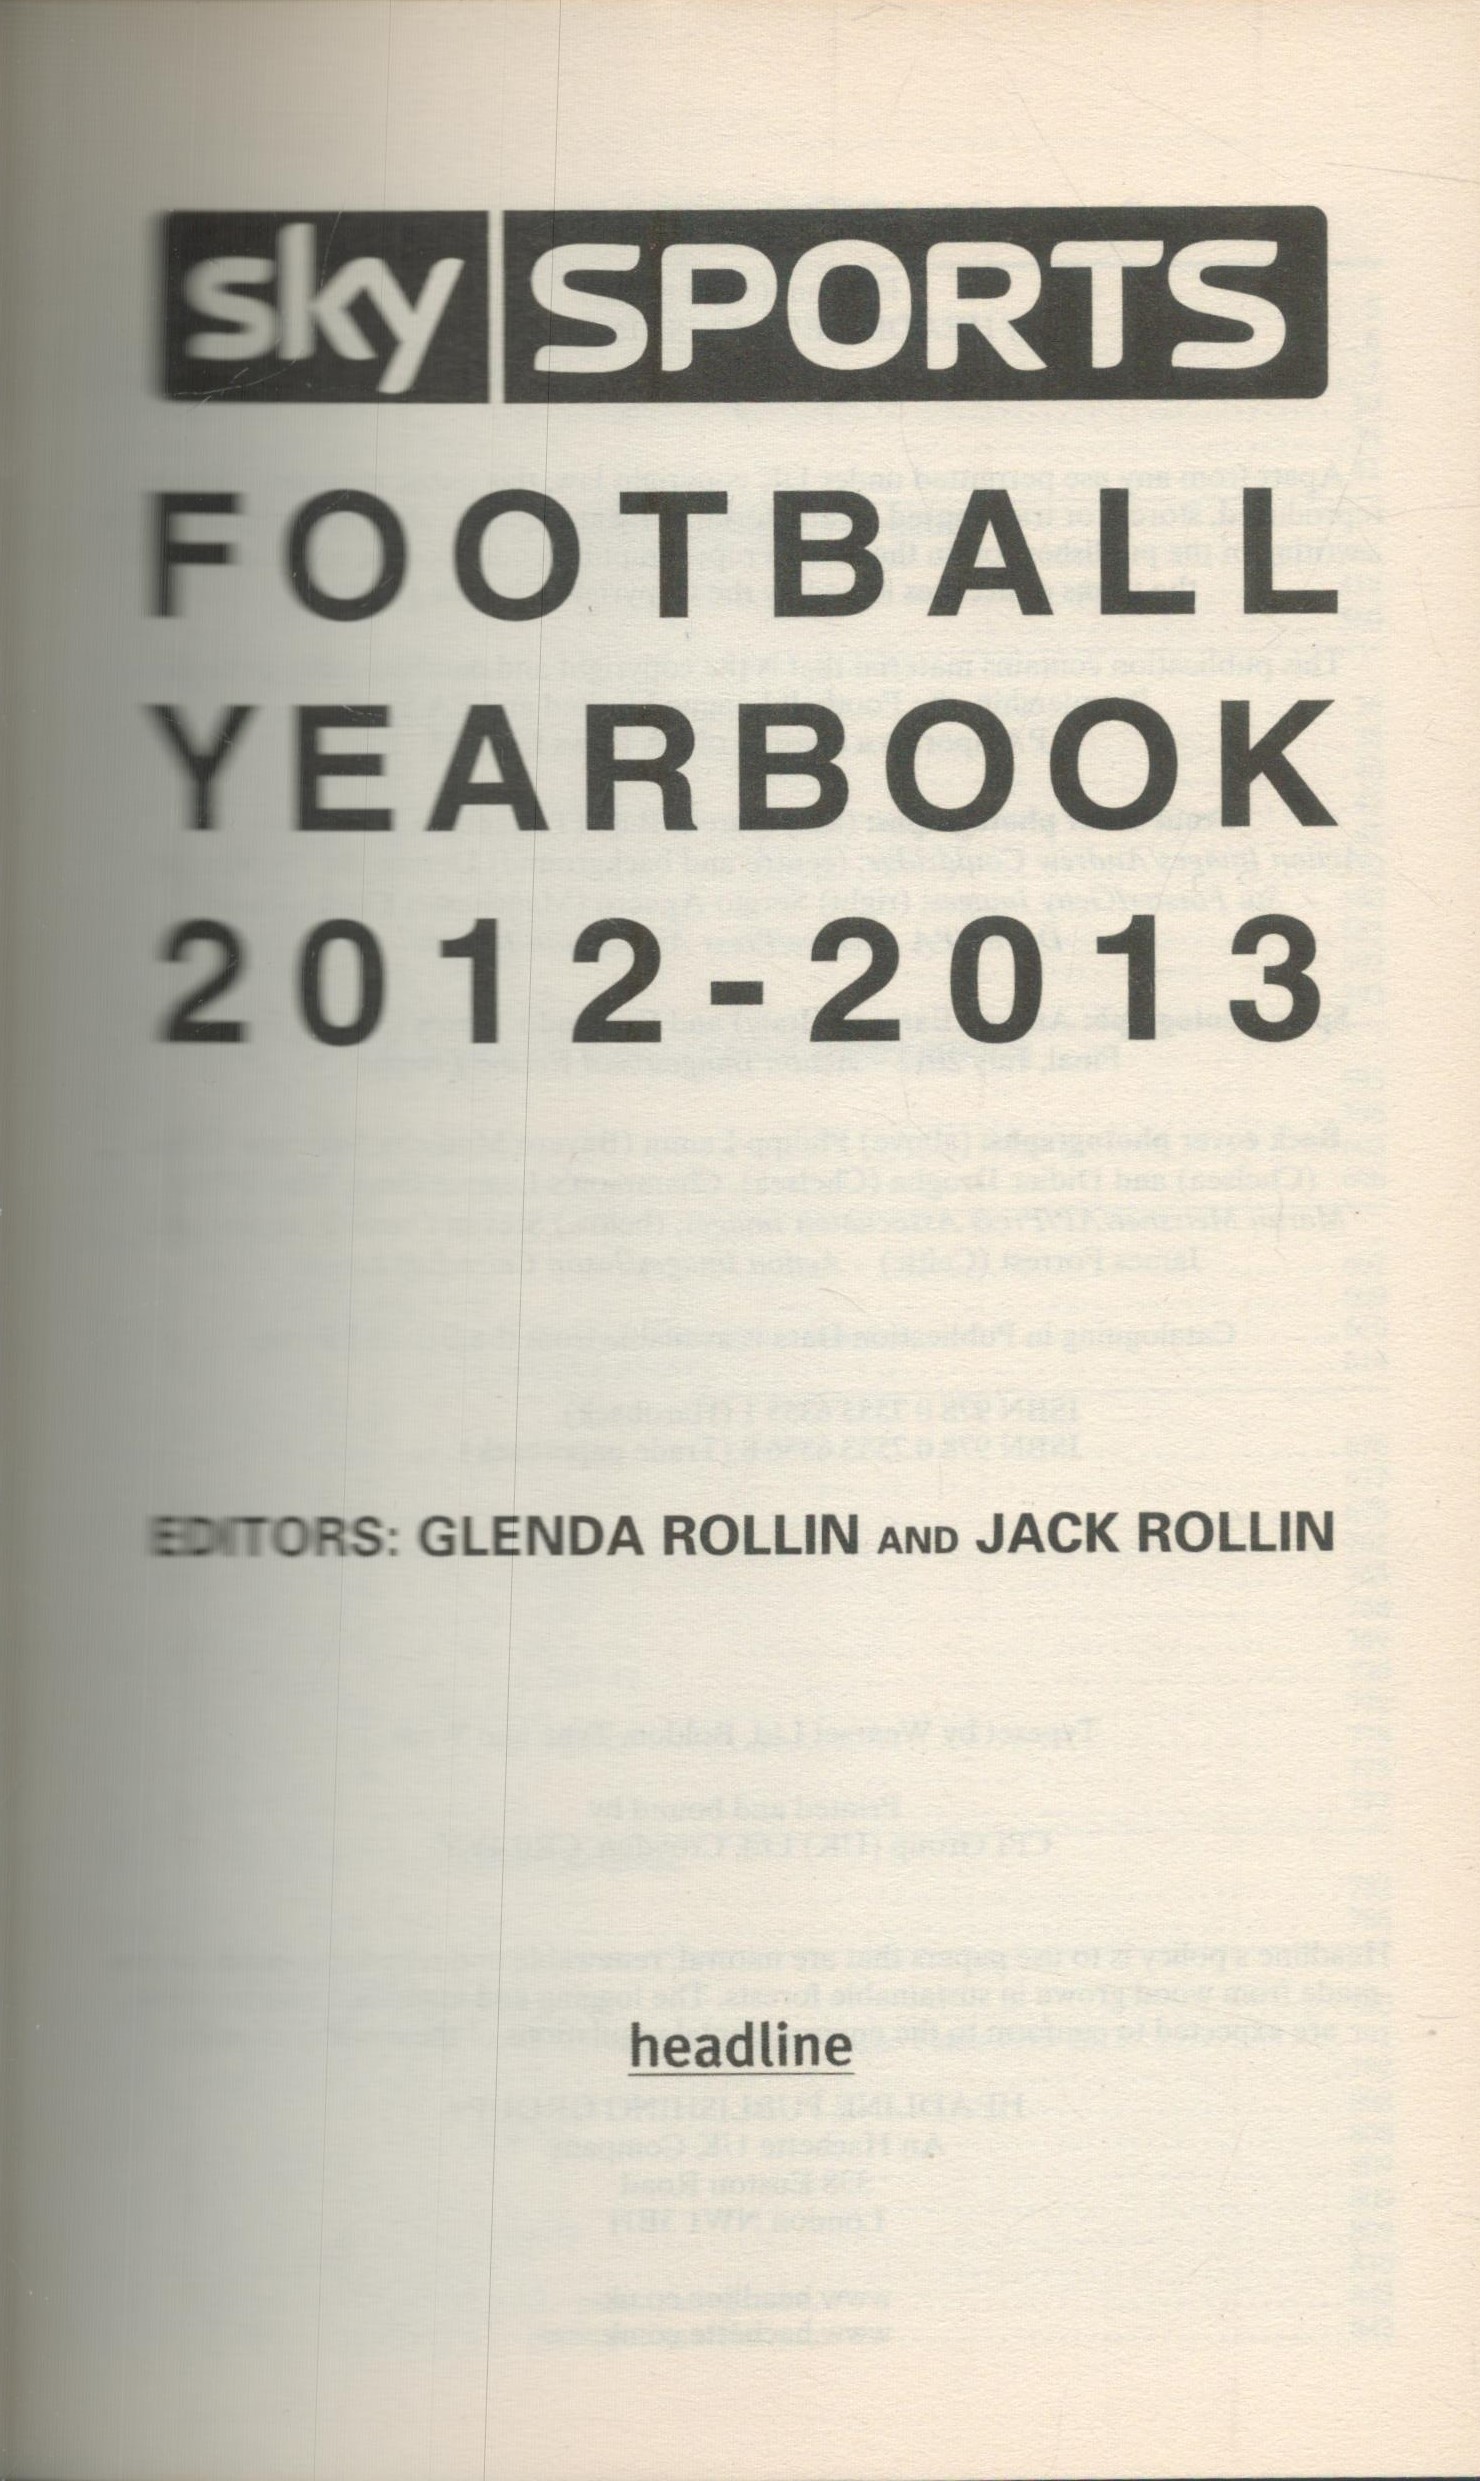 Sky Sports Football Yearbook 2012-2013 By Glenda Rollin, Jack Rollin paperback book. 1056 pages. - Image 2 of 3